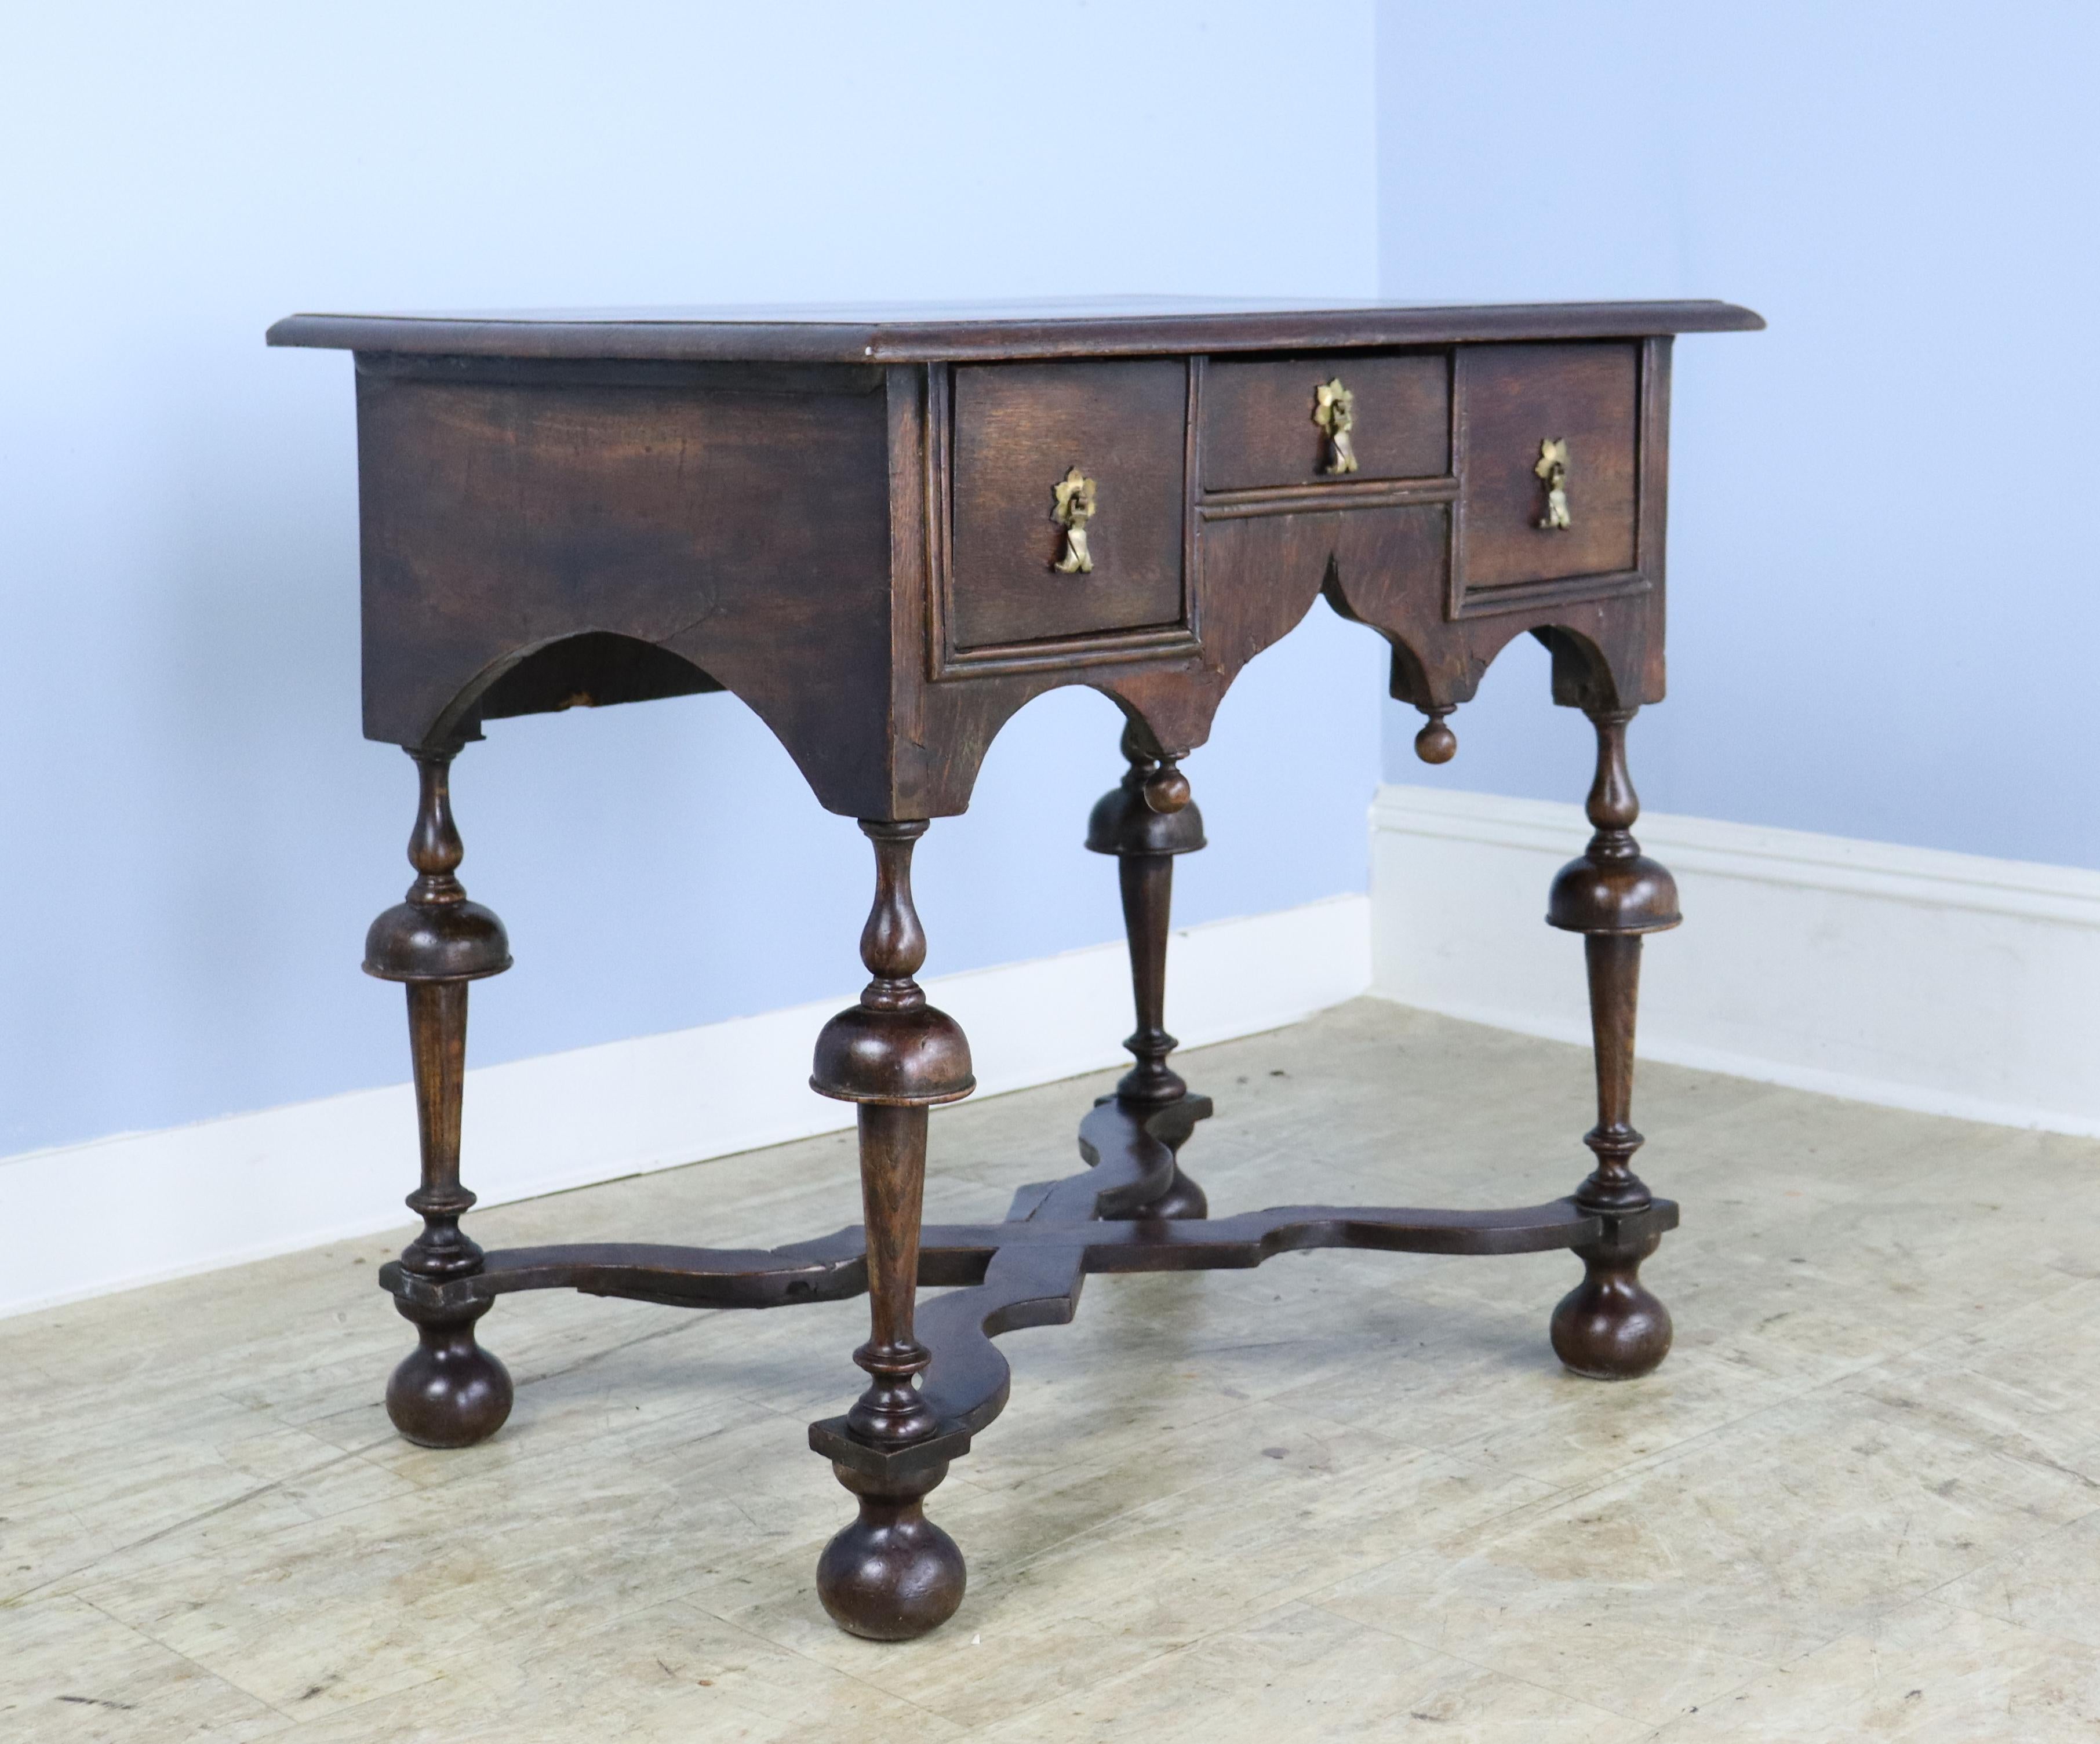 An antique lowboy from England with period bun feet and stylized finials. Three drawers with pretty original drop escutcheons. Note the elaborately carved apron and the unusual carved  criss-cross stretcher base. The oak has a rich and warm color. A